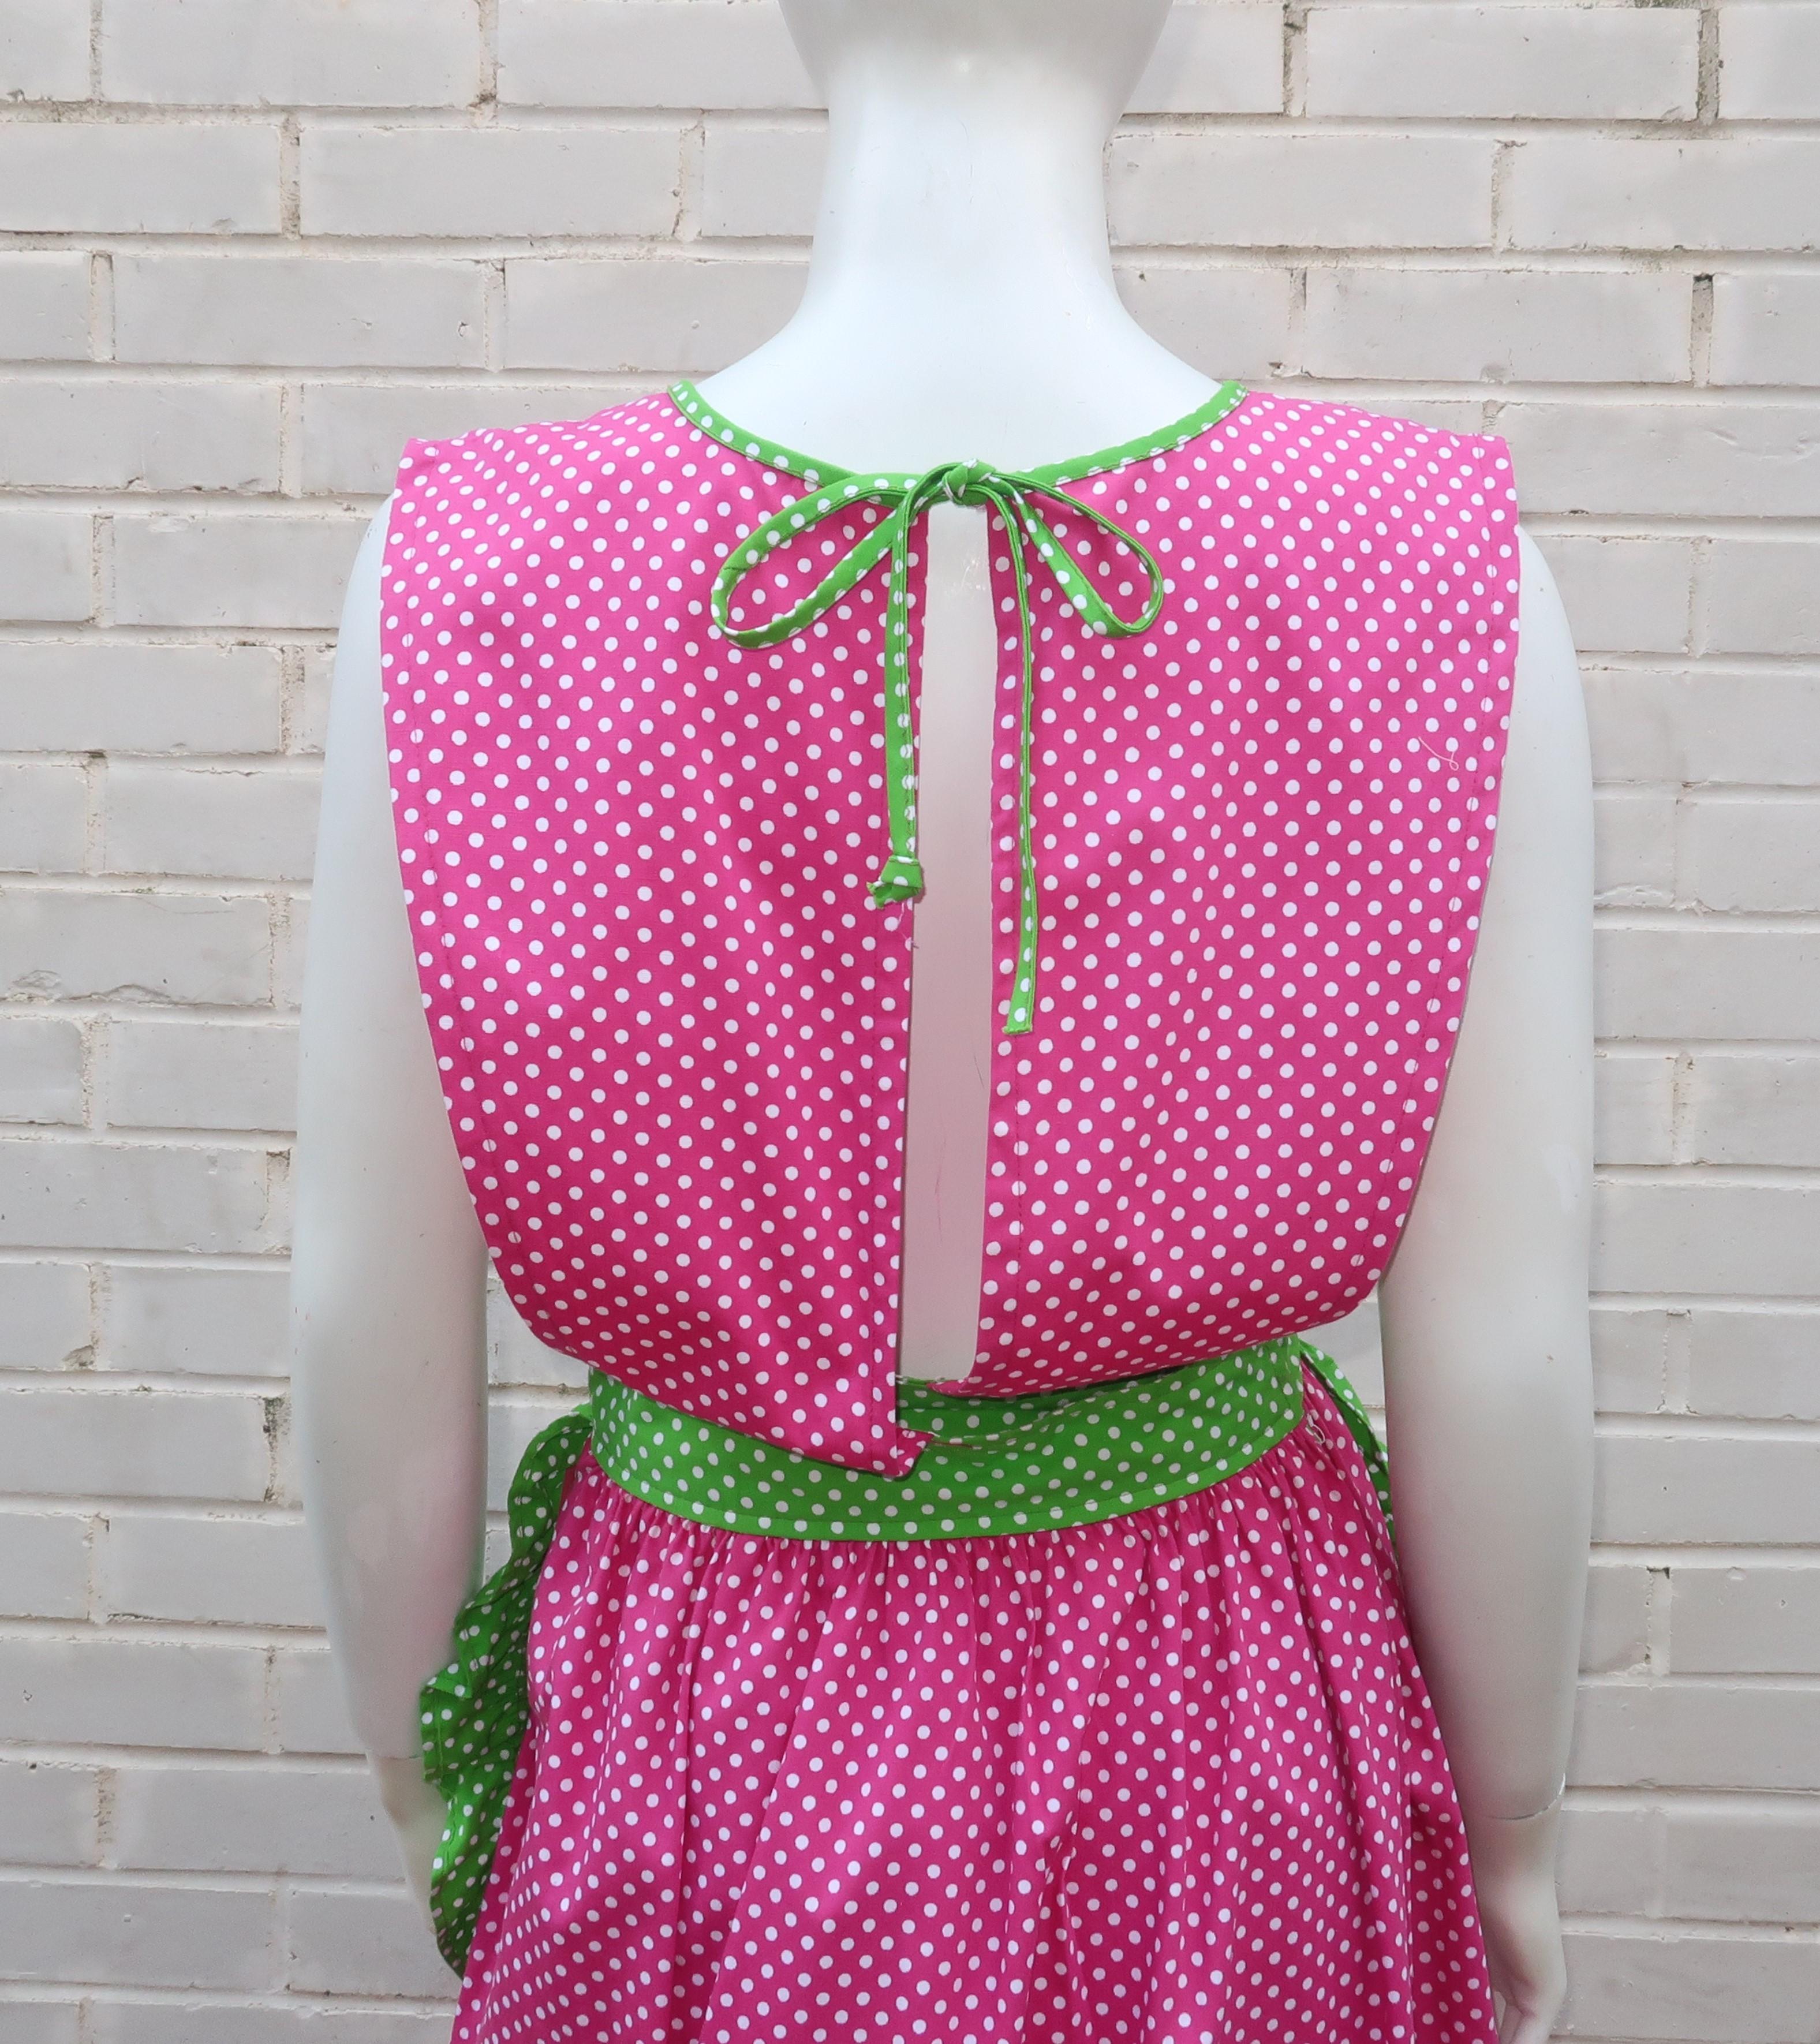 Design House Pink & Green Cotton Pinafore Apron Dress, C.1970 For Sale 5